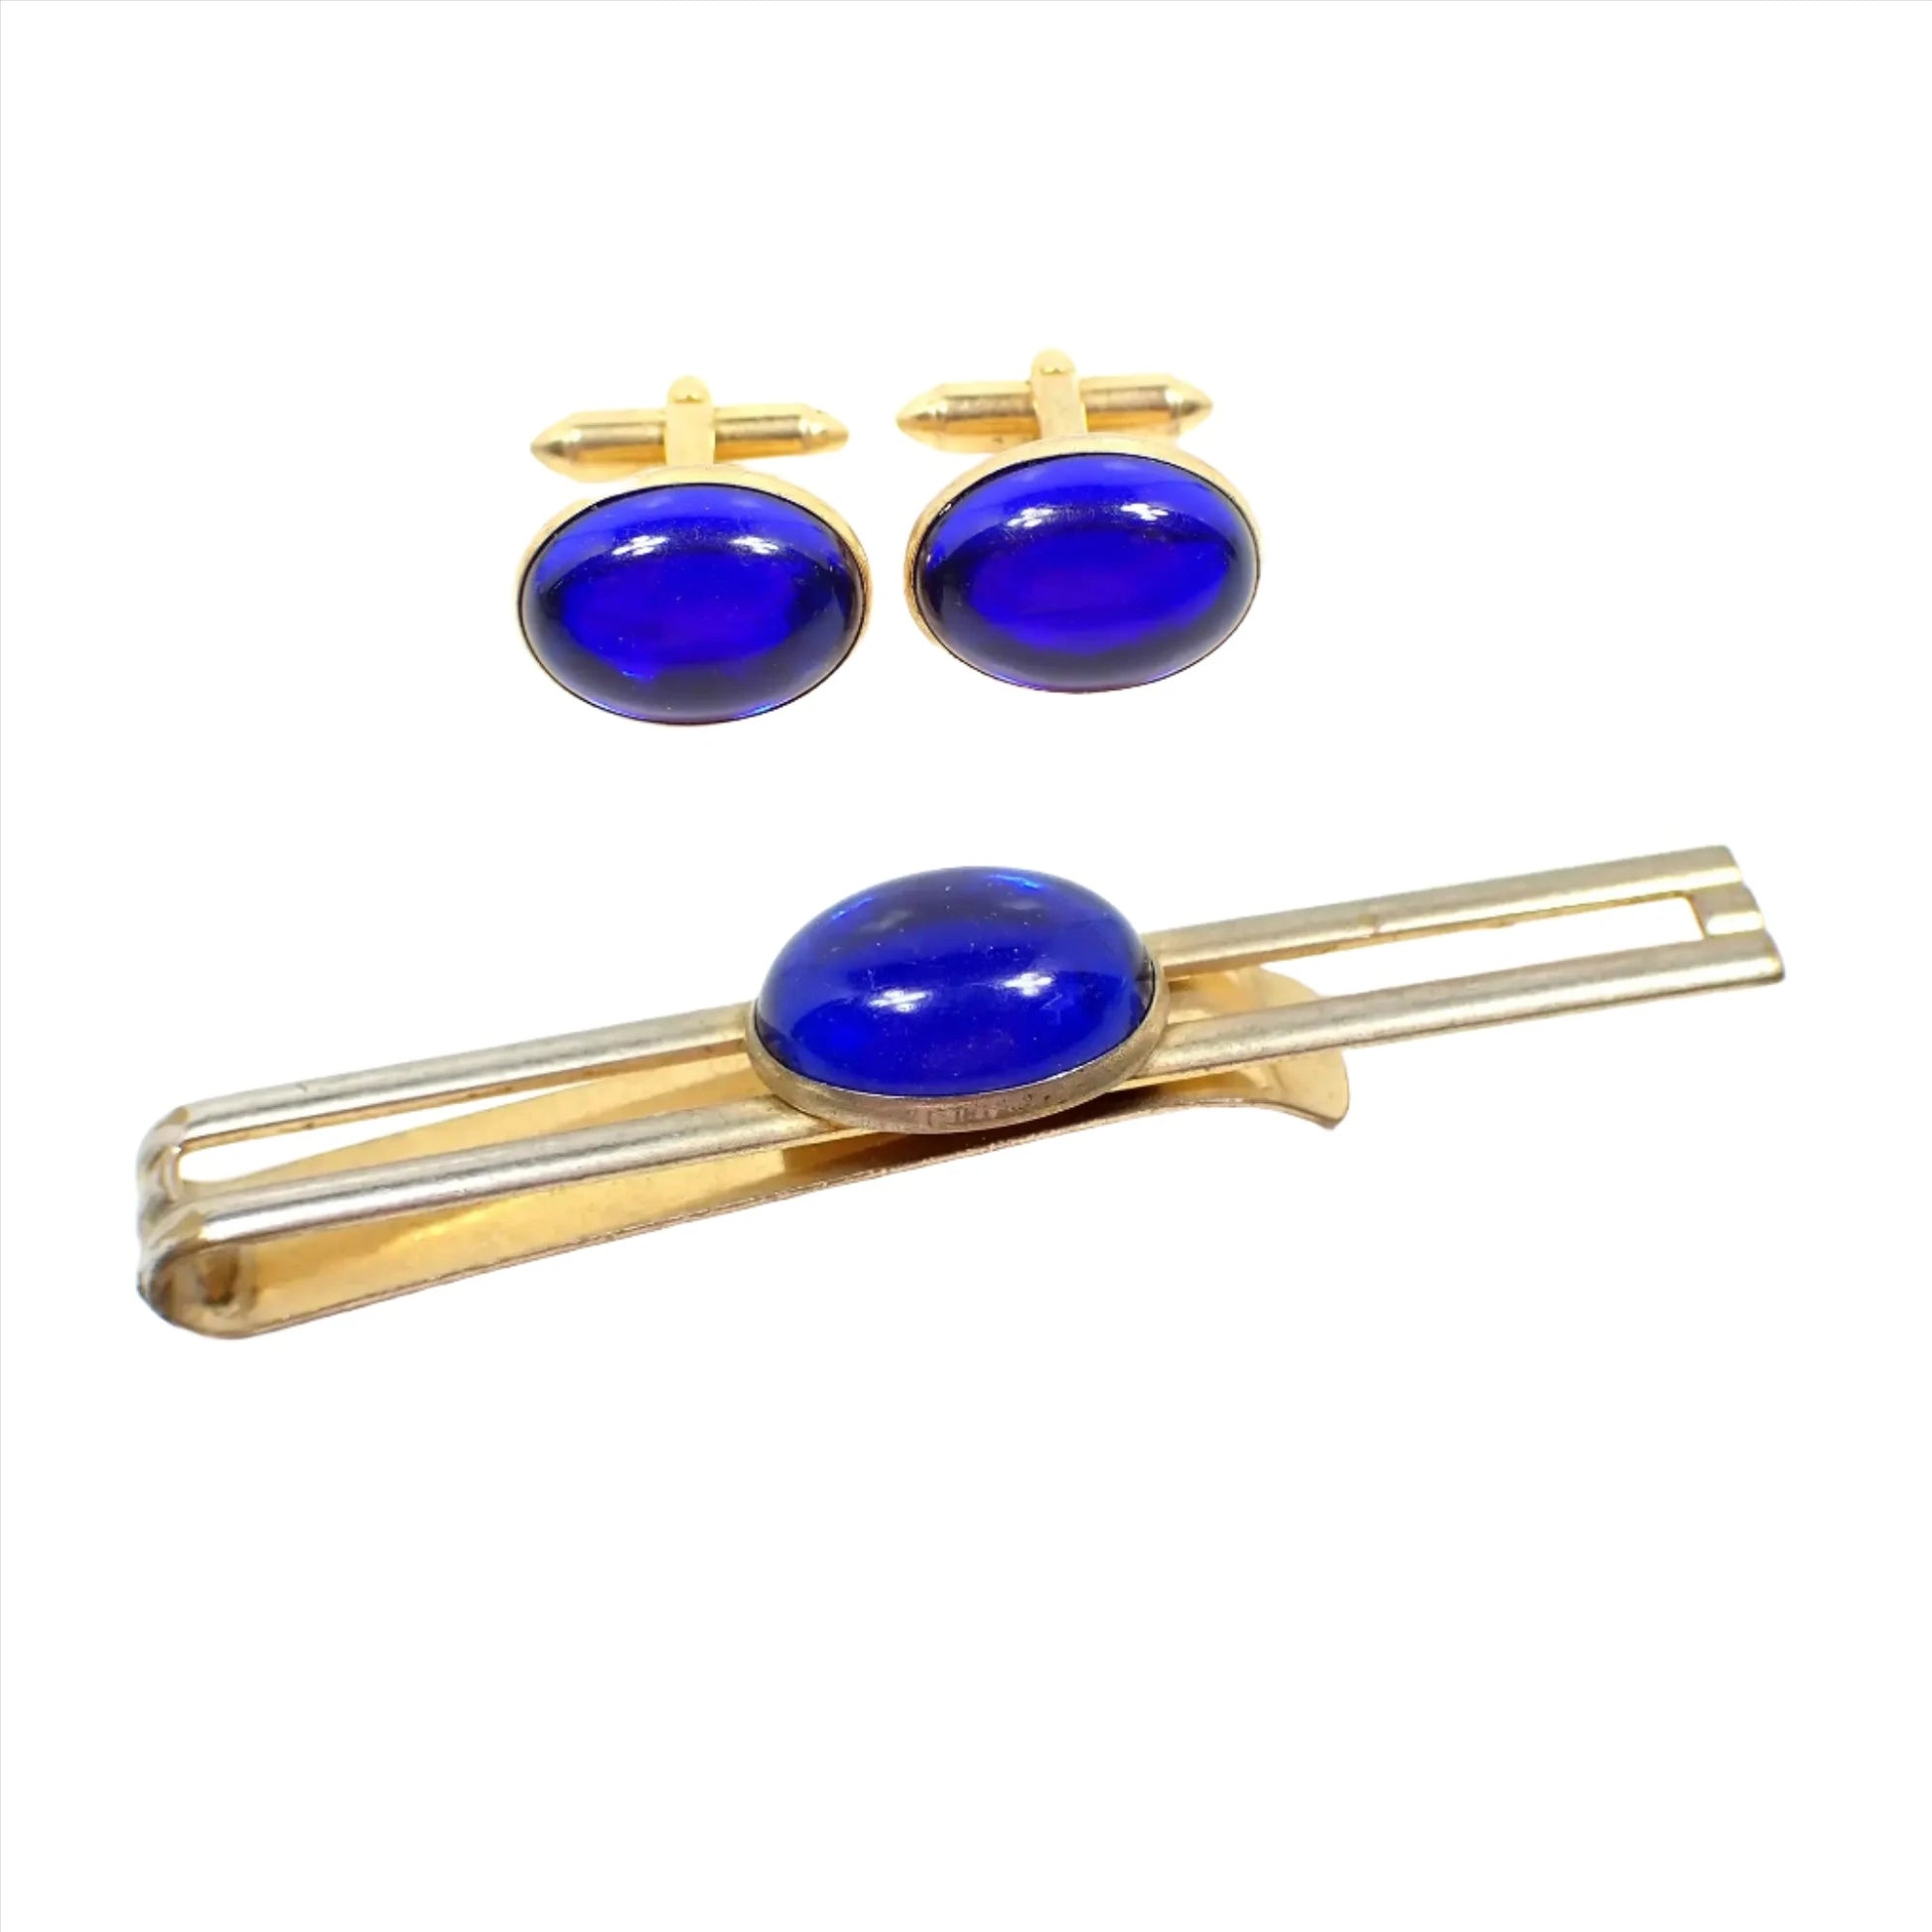 View of the Hadley Mid Century vintage men's jewelry set. The metal is gold tone in color. There is a slide on tie bar and cufflinks. The tie bar has an open bar style with oval lucite cab in the middle in bright blue. The cufflinks are also oval with blue lucite cabs. 